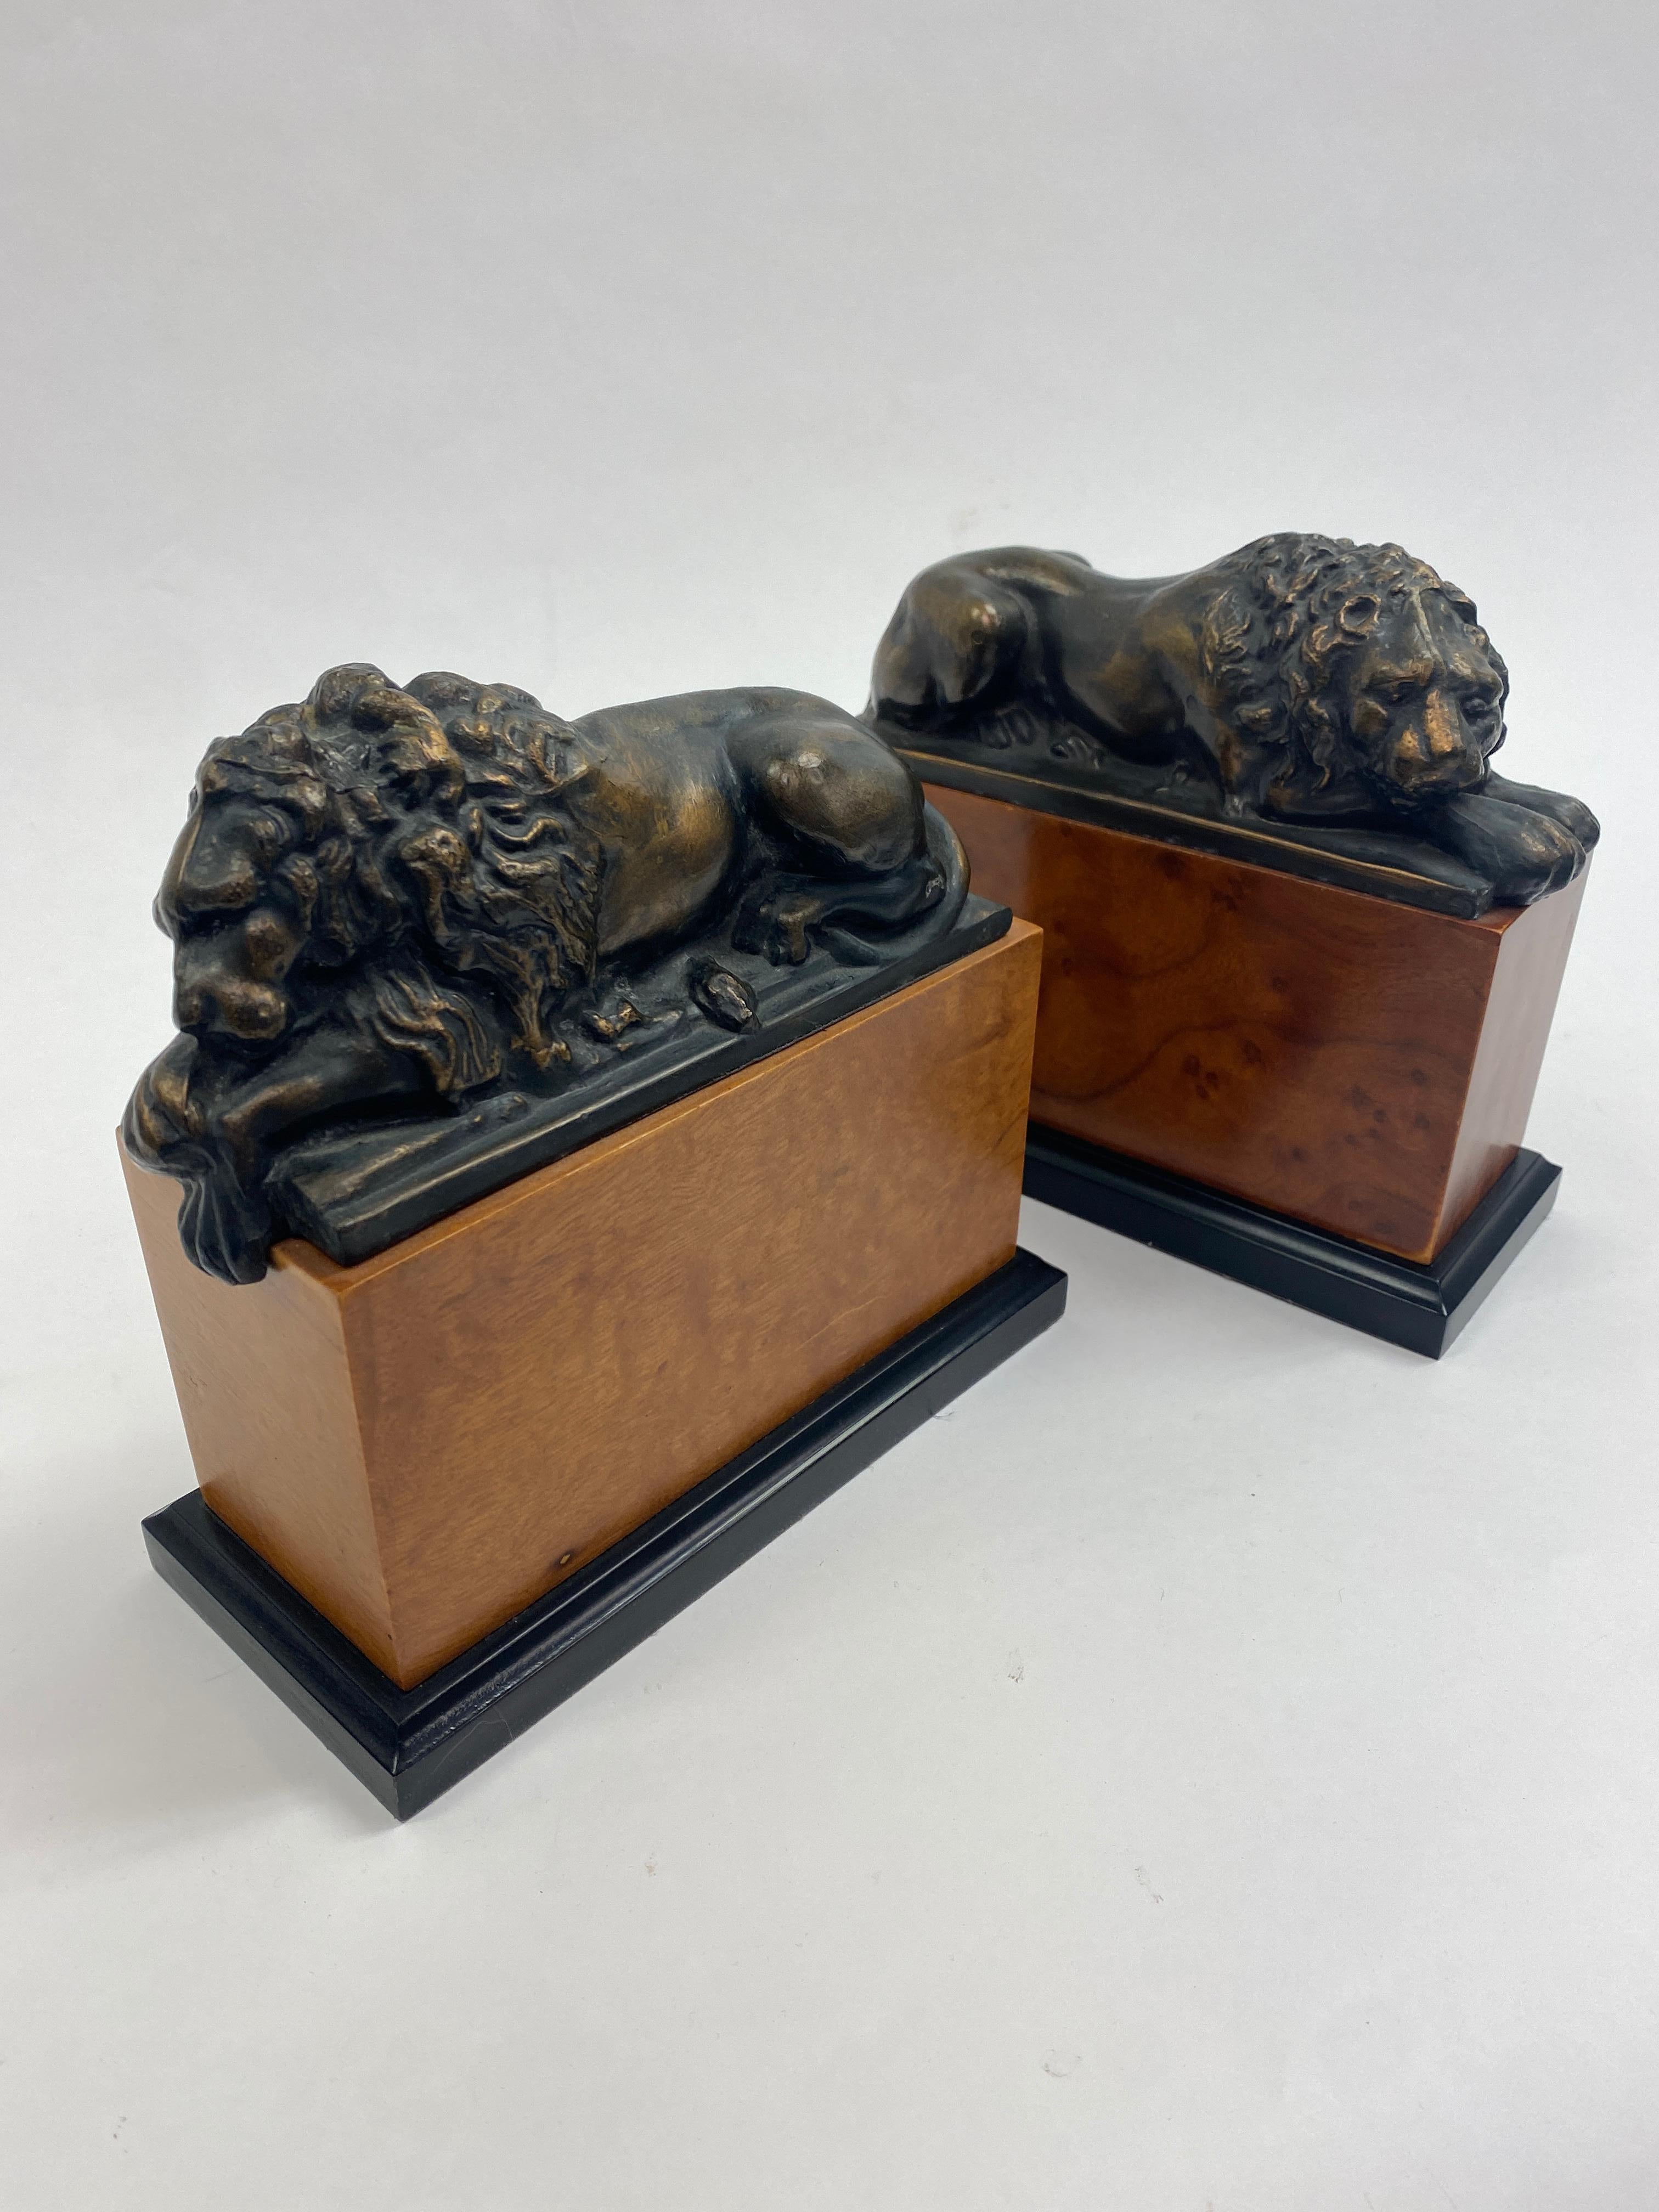 Handsome pair of bronze sleeping lion bookends. Both lions are resting atop of cherry wood blocks with an ebonized base lined with felt on the bottom surface.
Great items for a desk or bookcase.